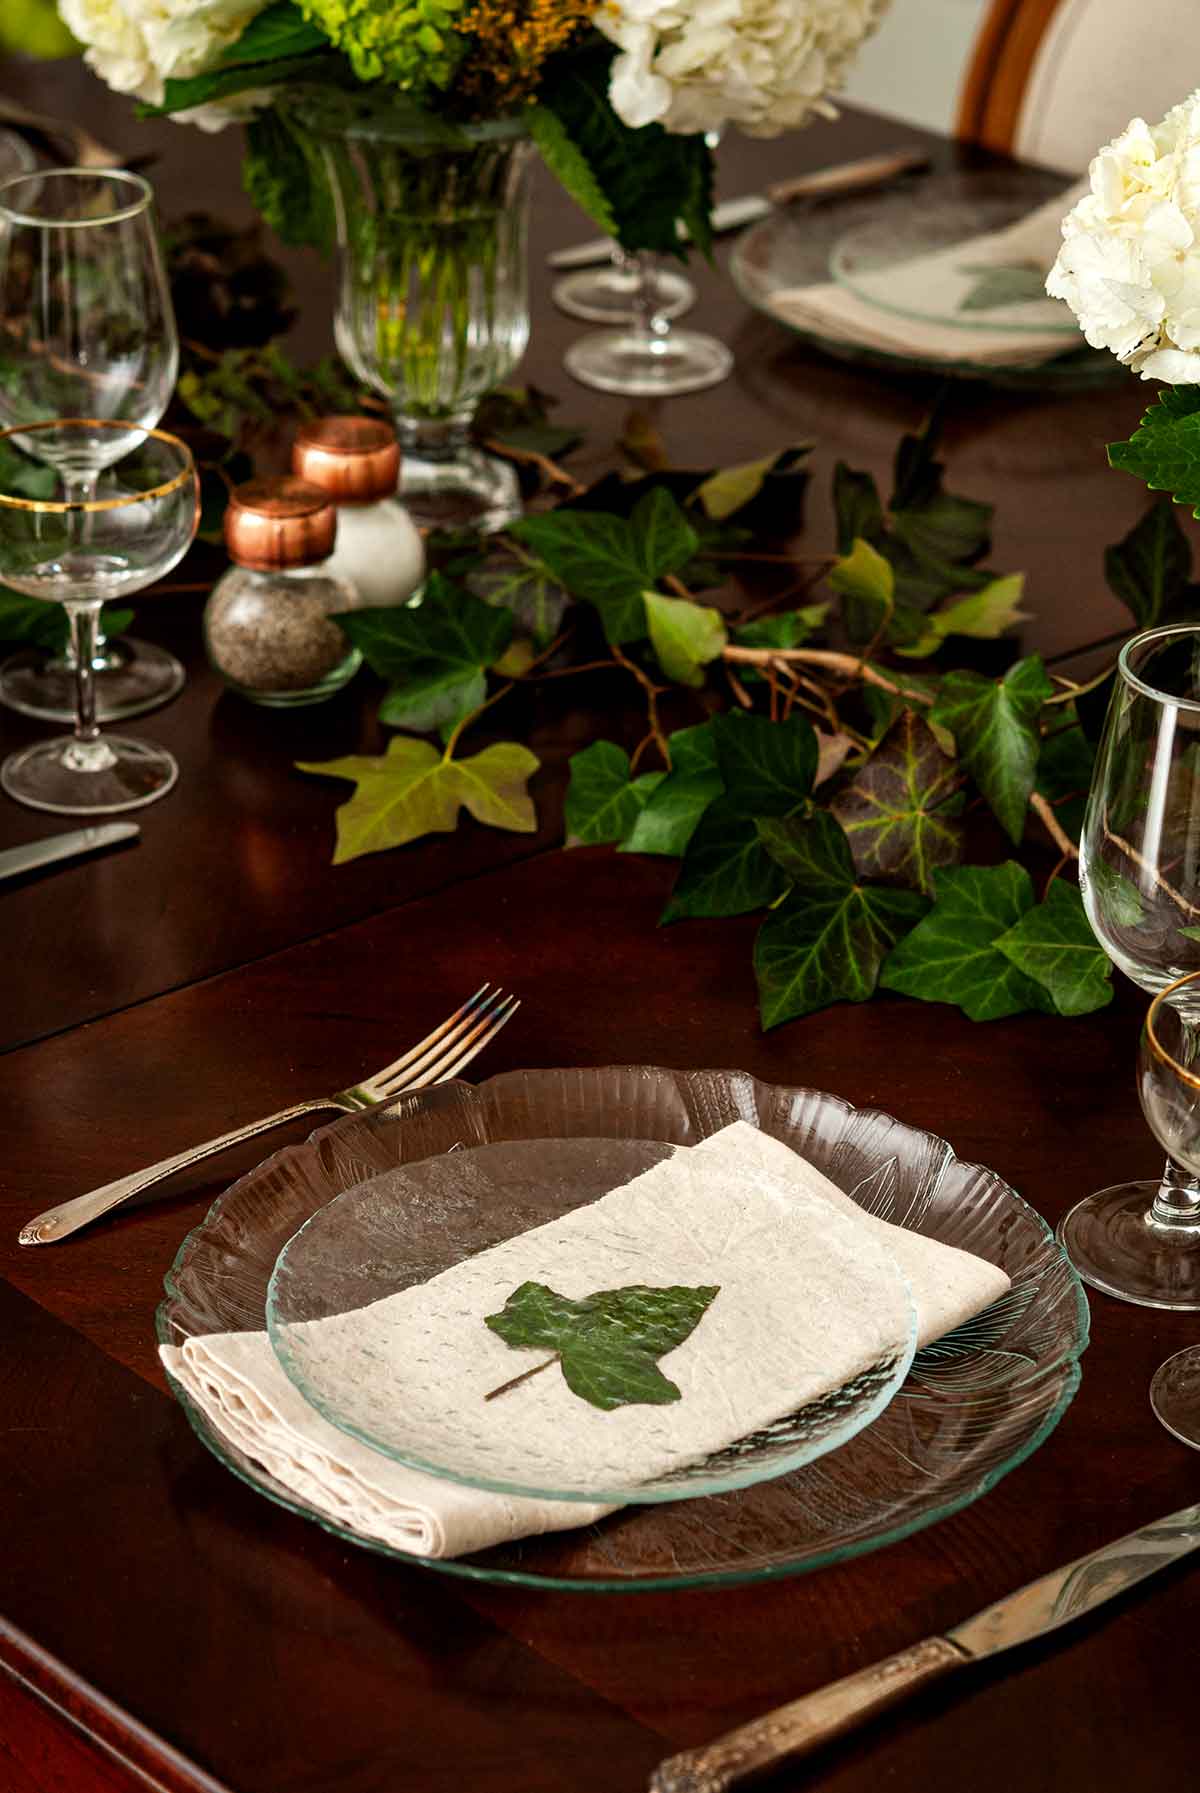 2 plates with an ivy leaf between them on a table decorated with ivy.